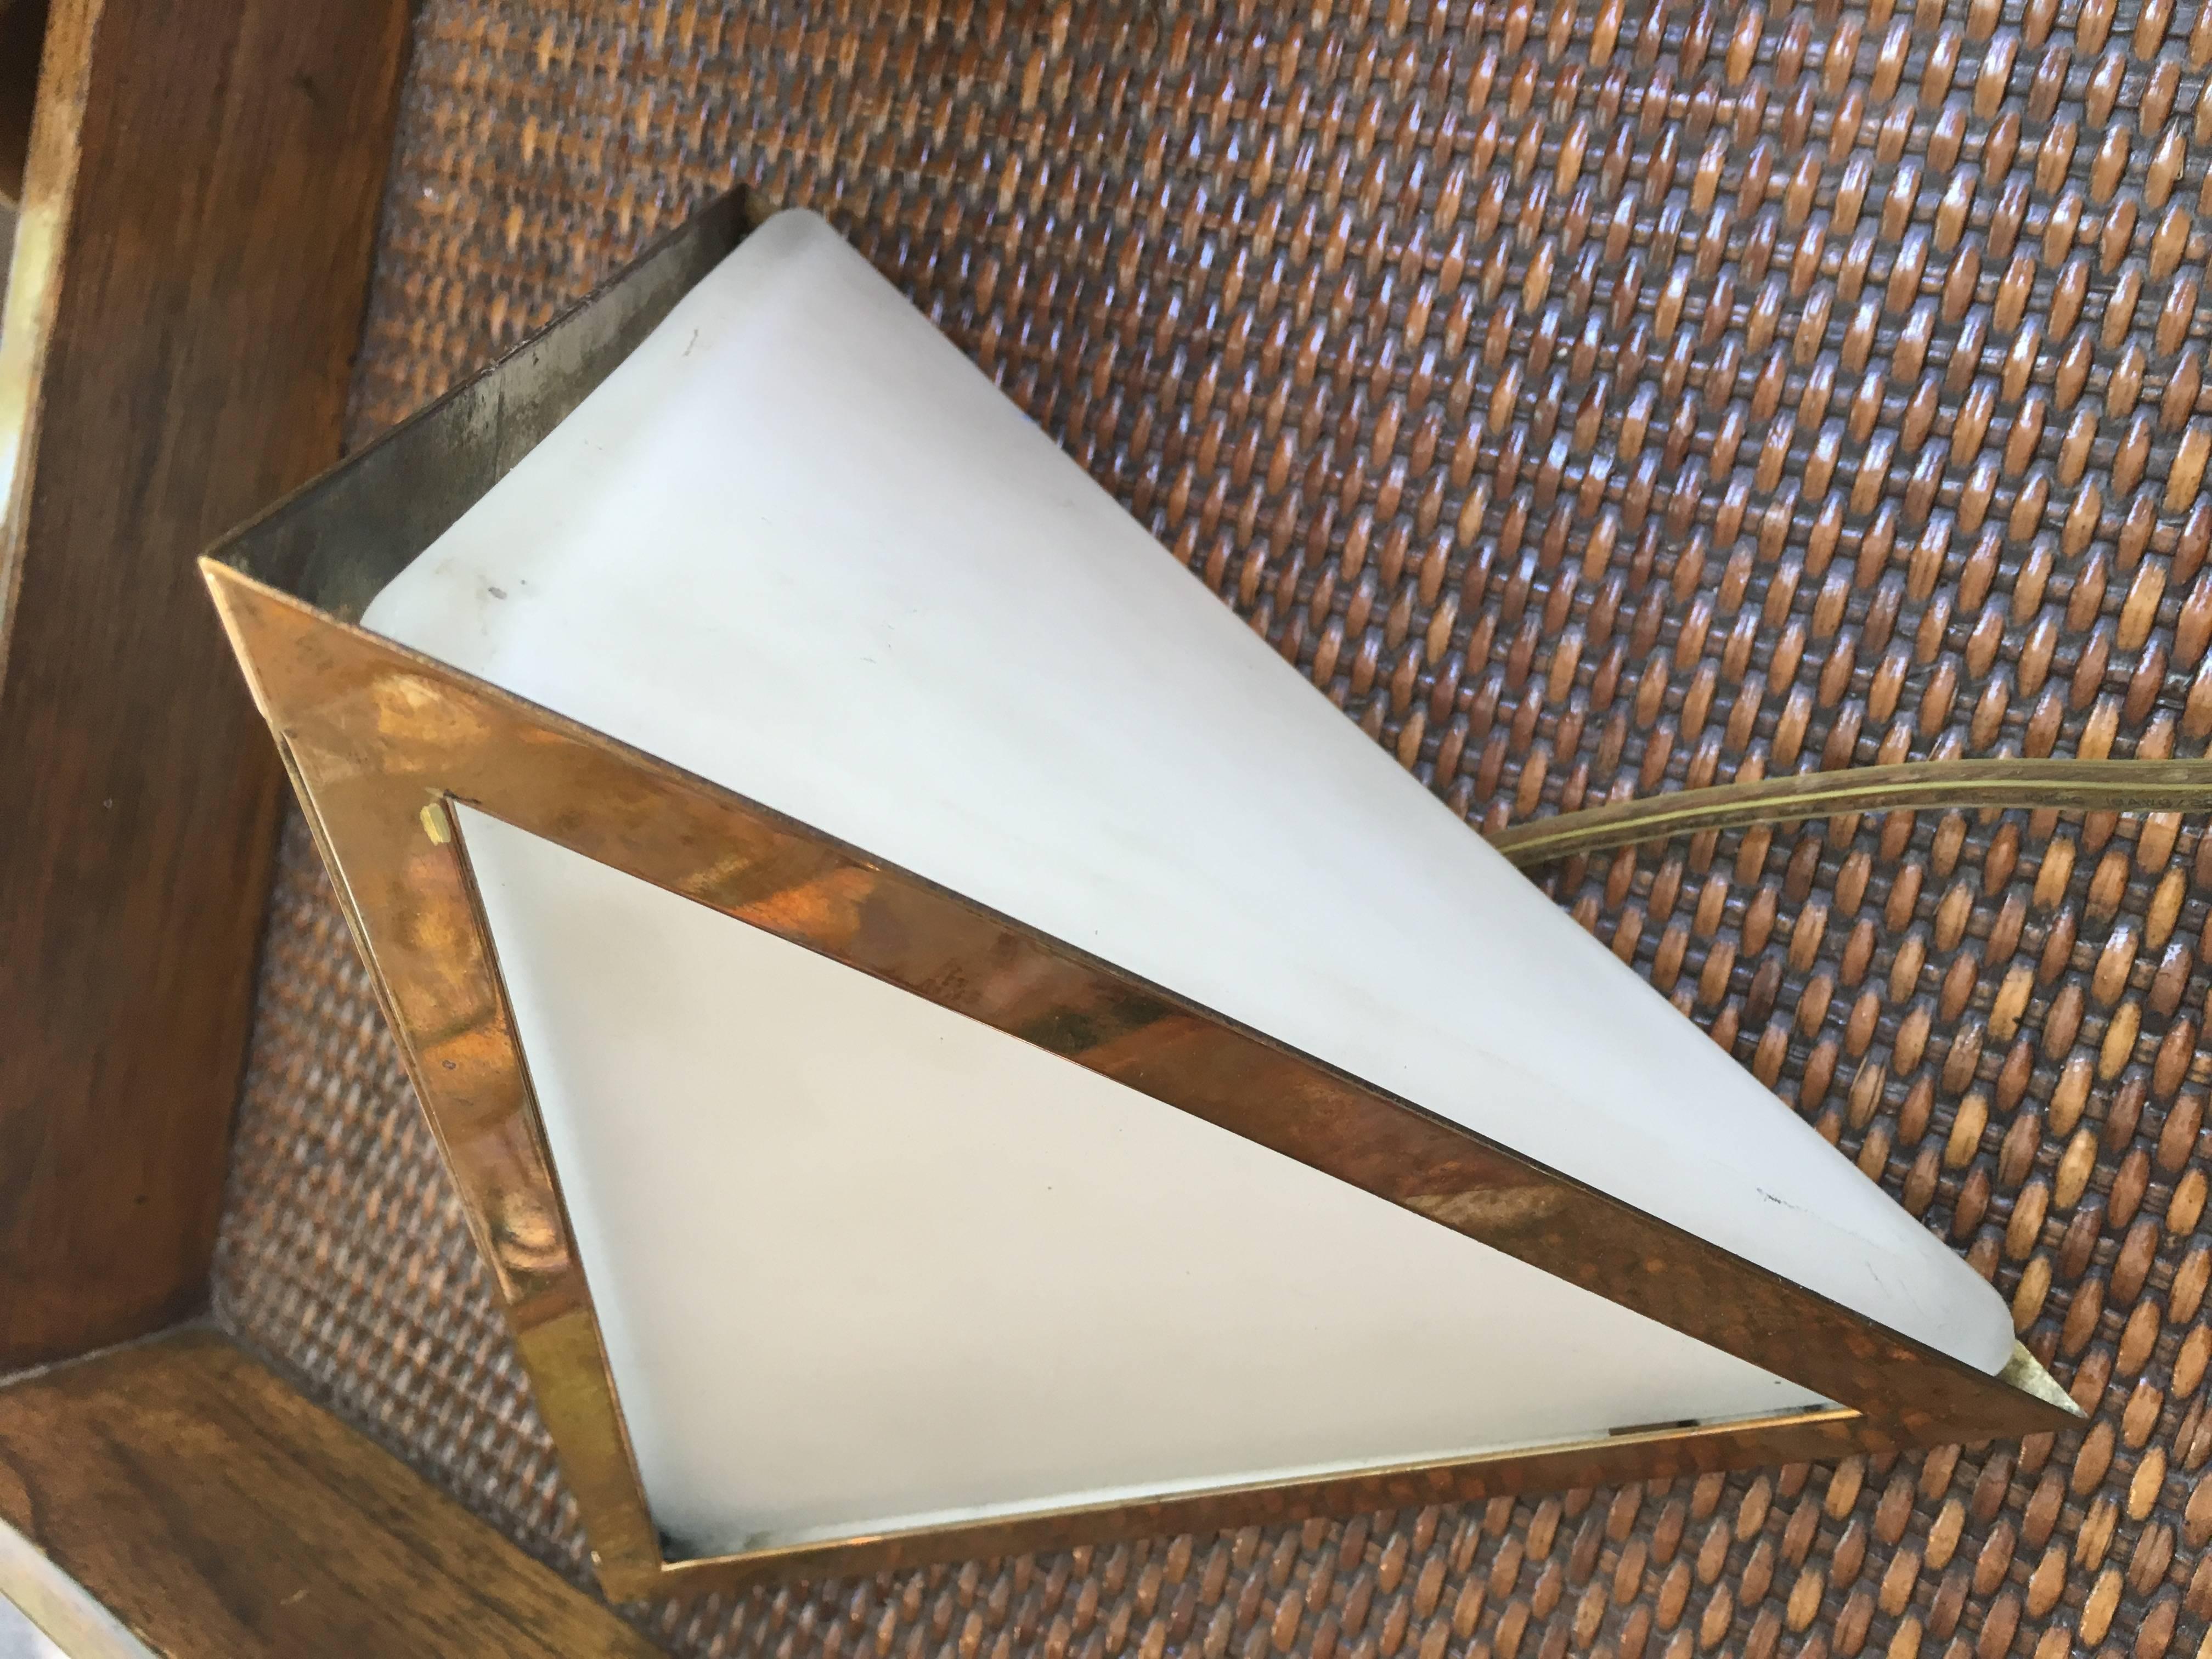 Milk Glass Pair of Triangular Wall Sconces from a 1970s Cruise Ship Stateroom